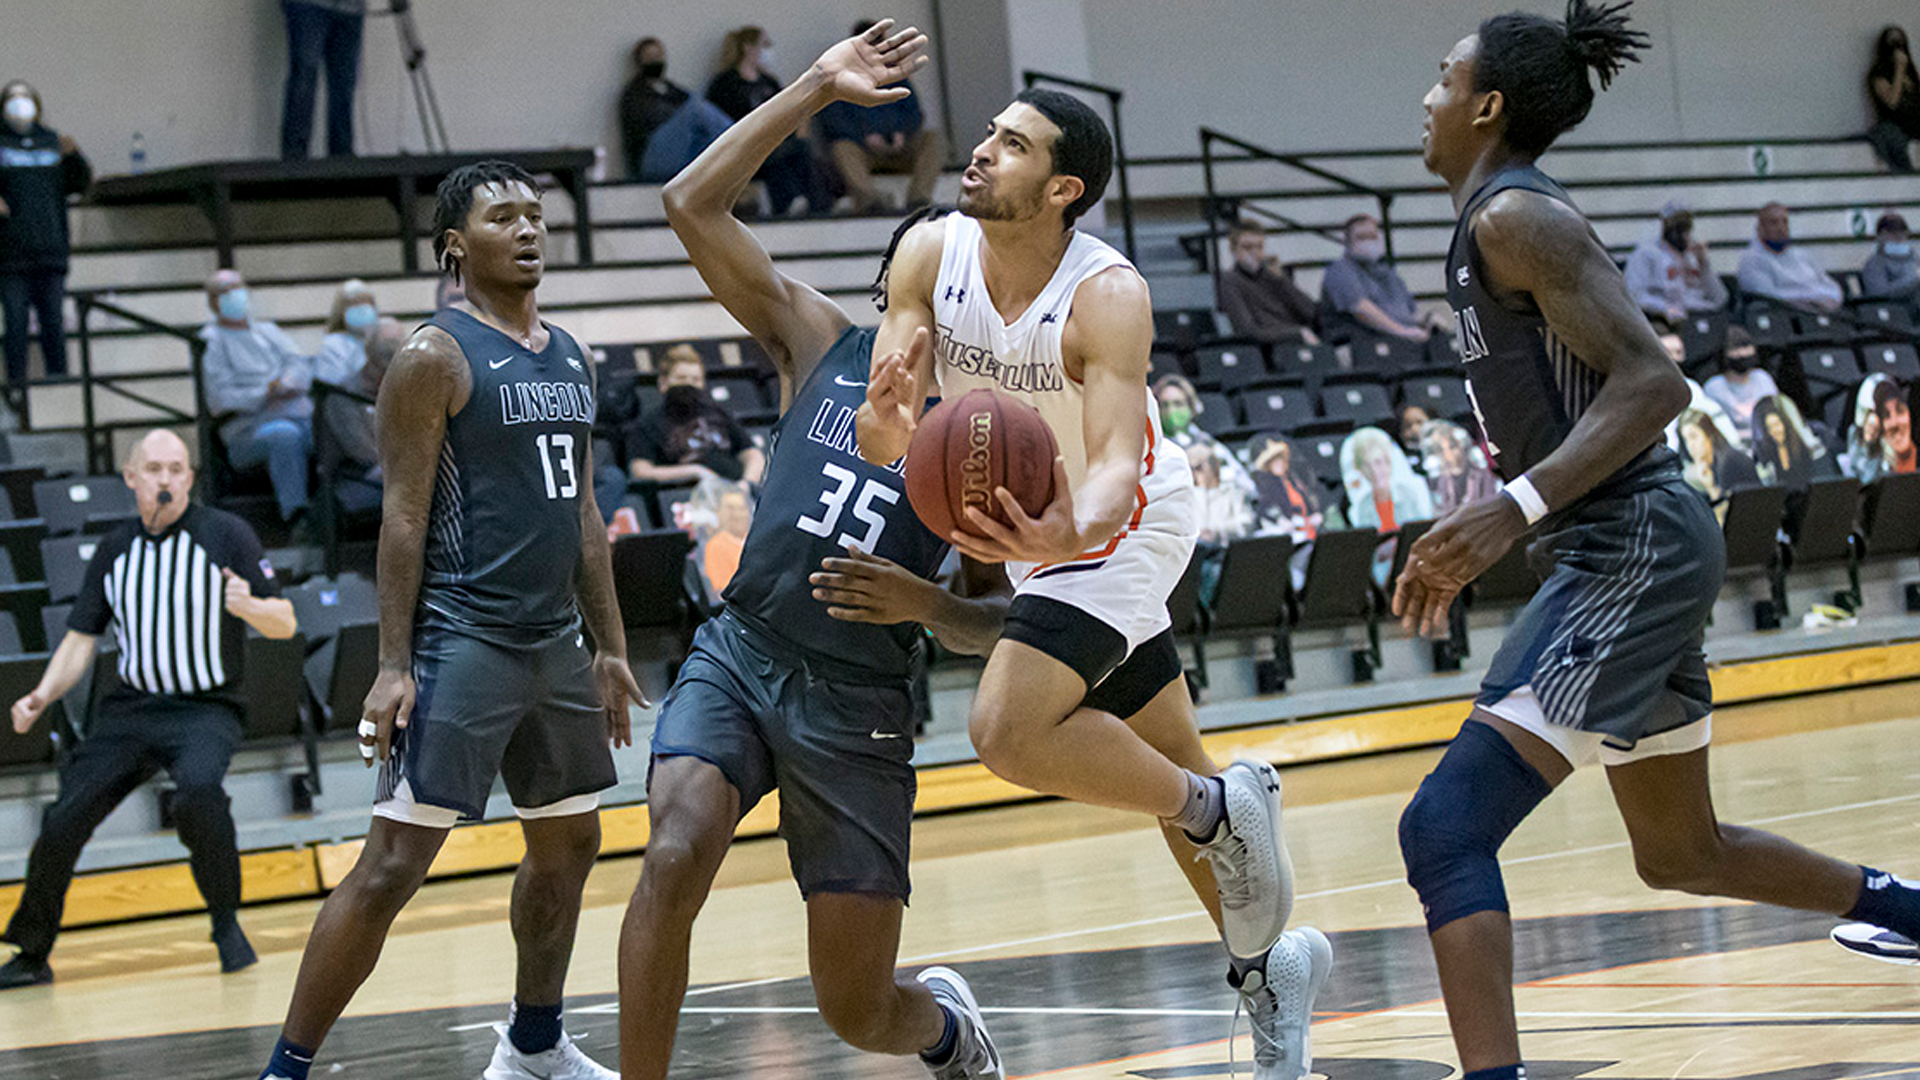 Trenton Gibson tallied 22 points and eight assists to lead Tusculum to a 90-74 win over No. 8 Lincoln Memorial (photo by Chuck Williams)